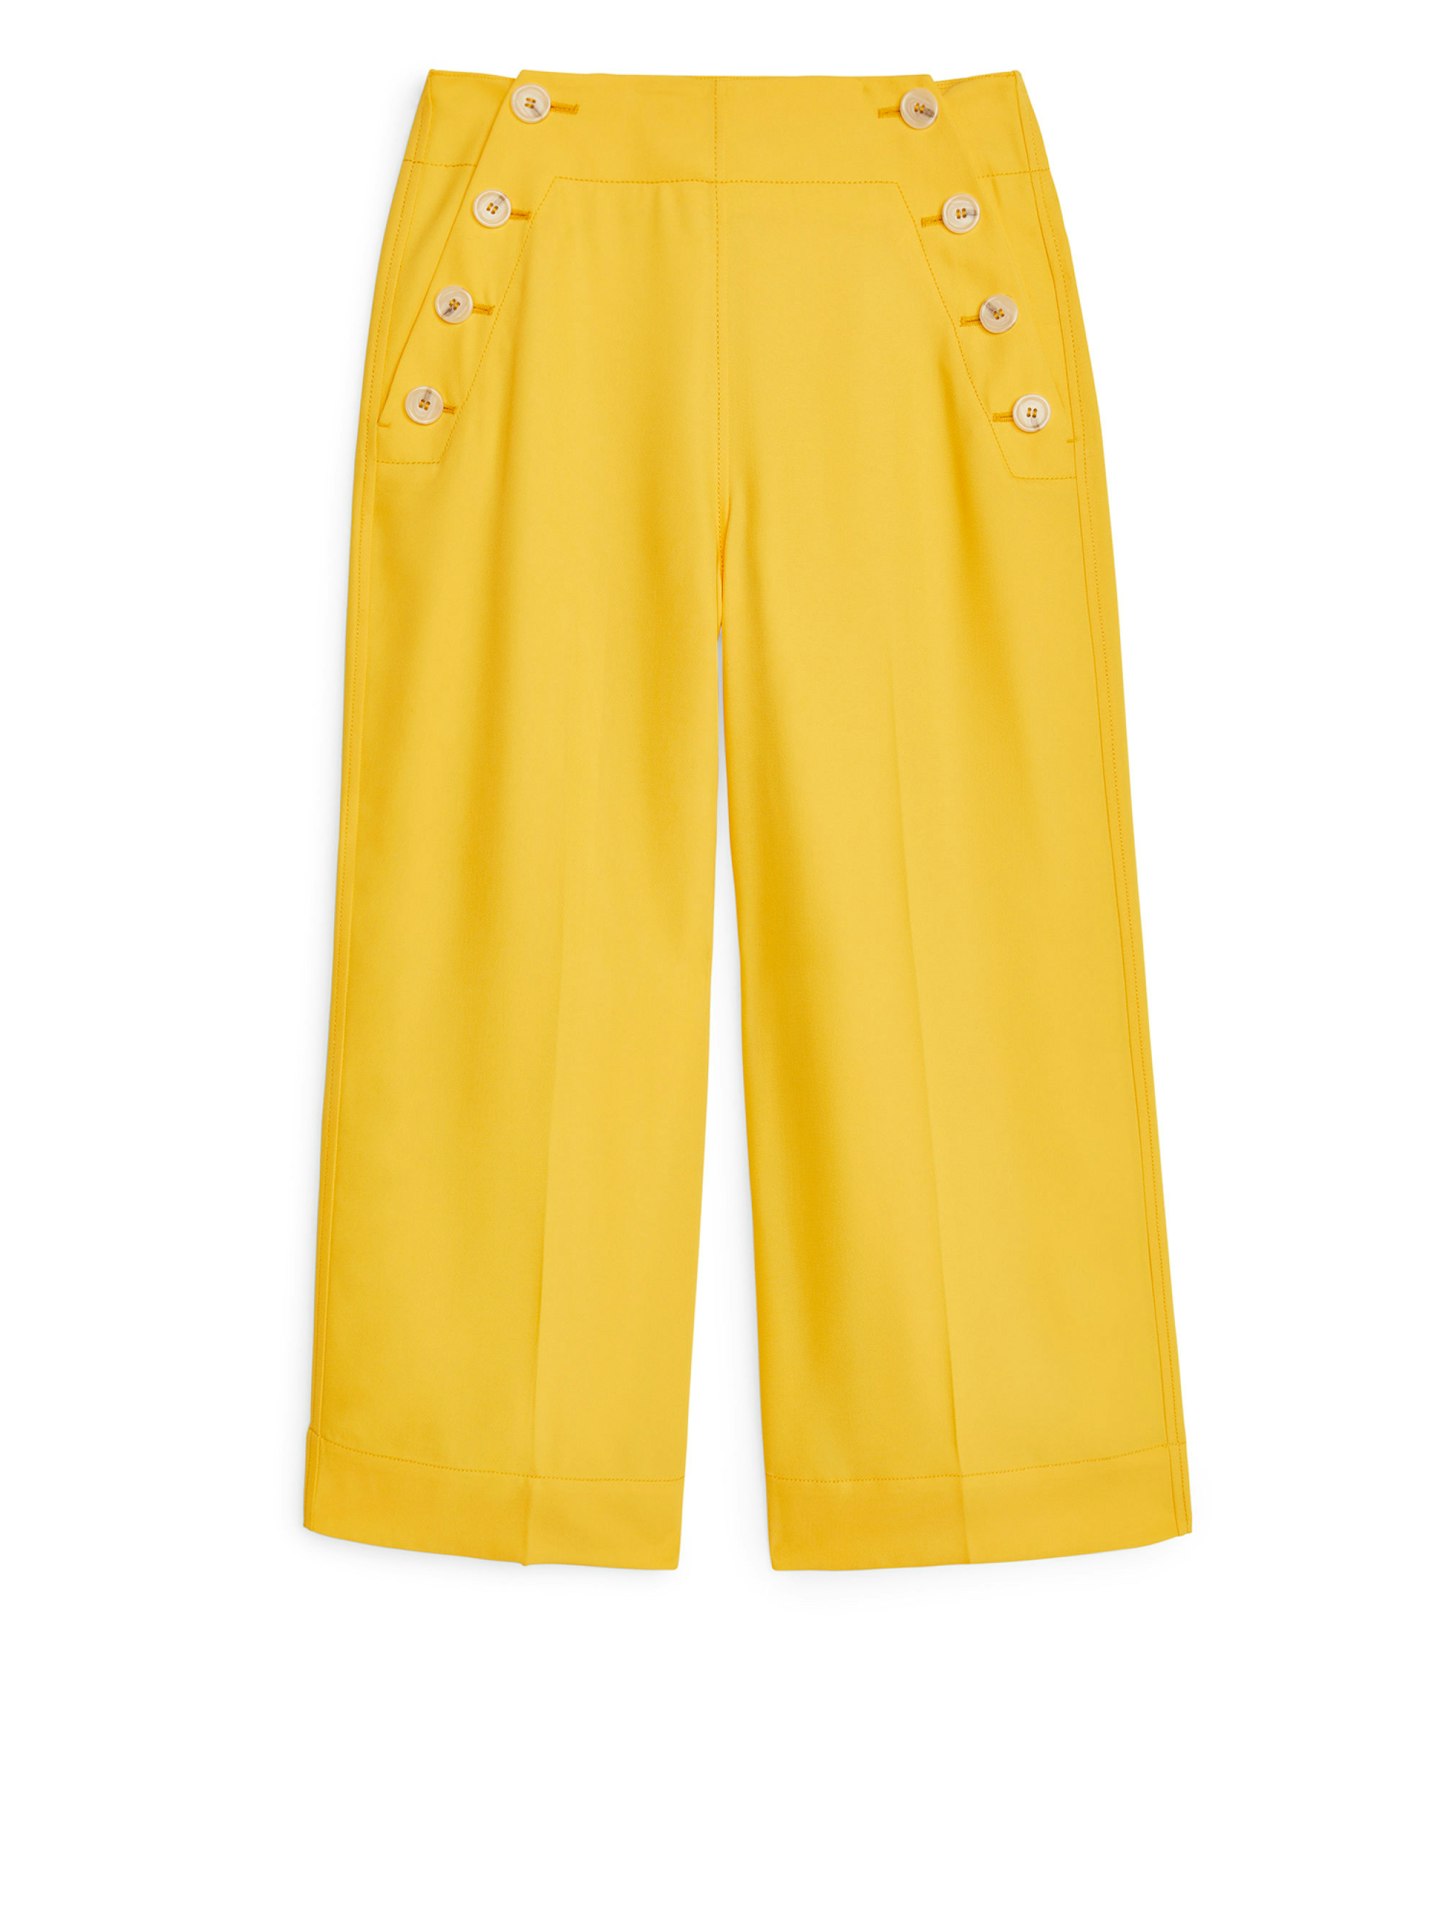 Arket, Cropped Sailor Trousers, £59